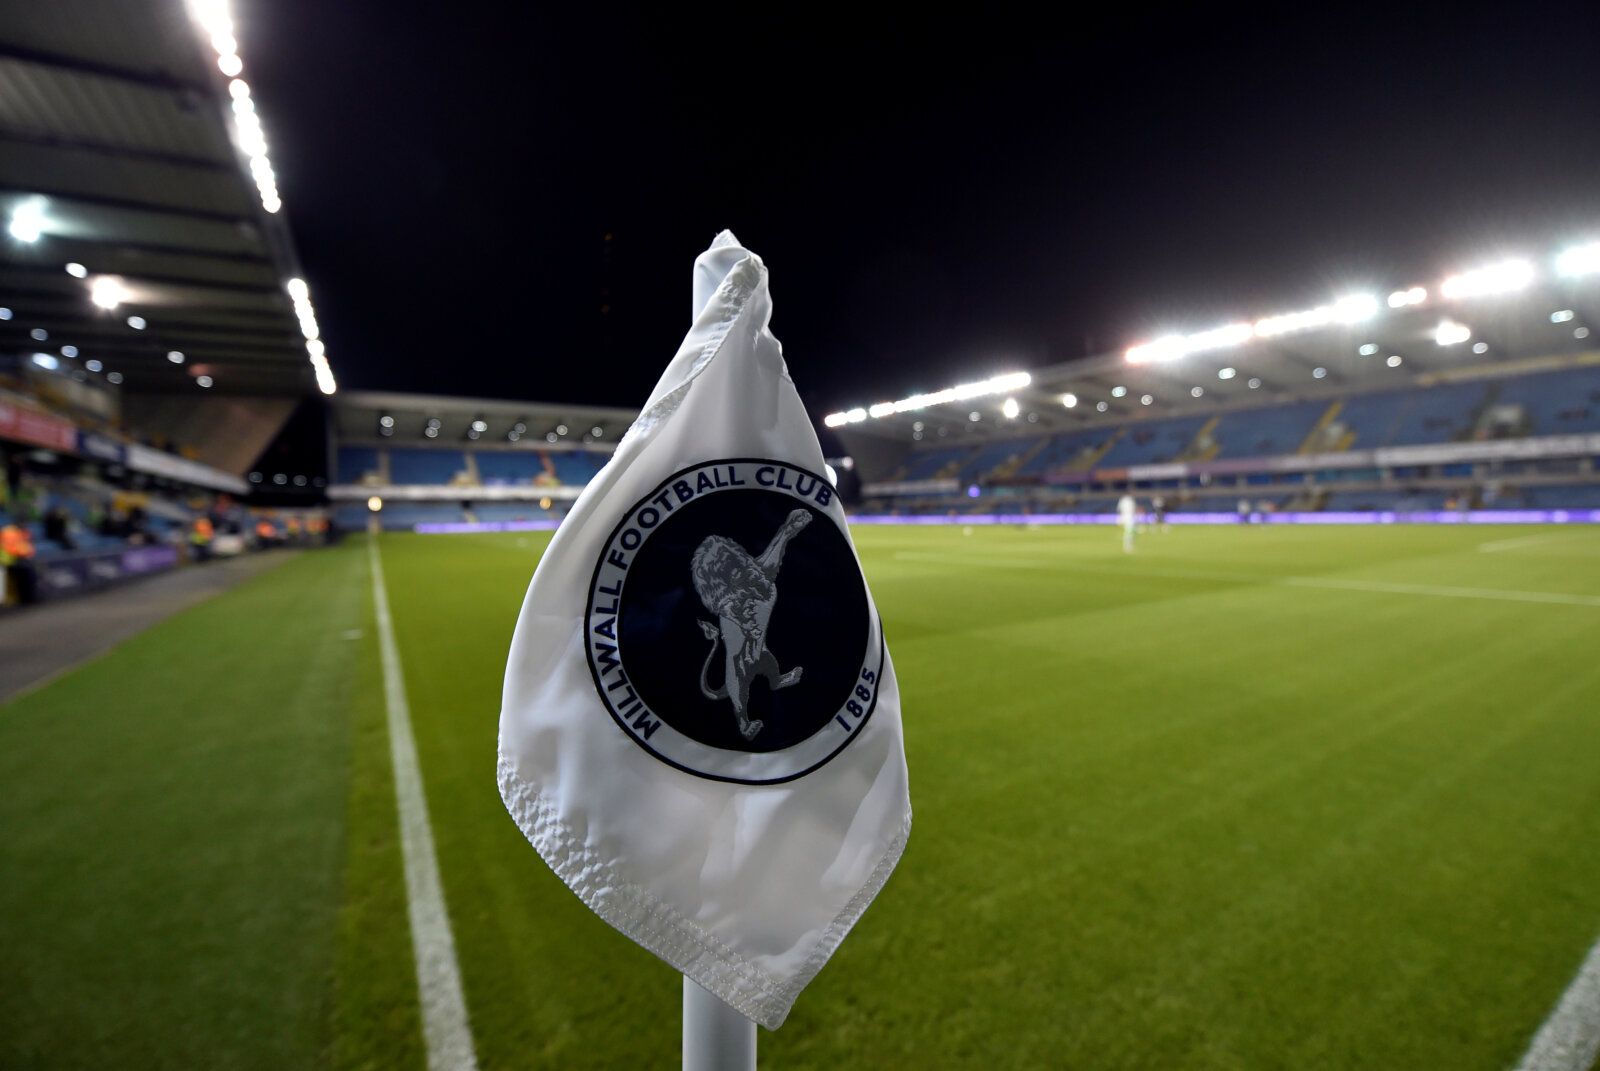 Soccer Football - Championship - Millwall v Cardiff City - The Den, London, Britain - October 22, 2019  General view before the match   Action Images/Adam Holt  EDITORIAL USE ONLY. No use with unauthorized audio, video, data, fixture lists, club/league logos or 